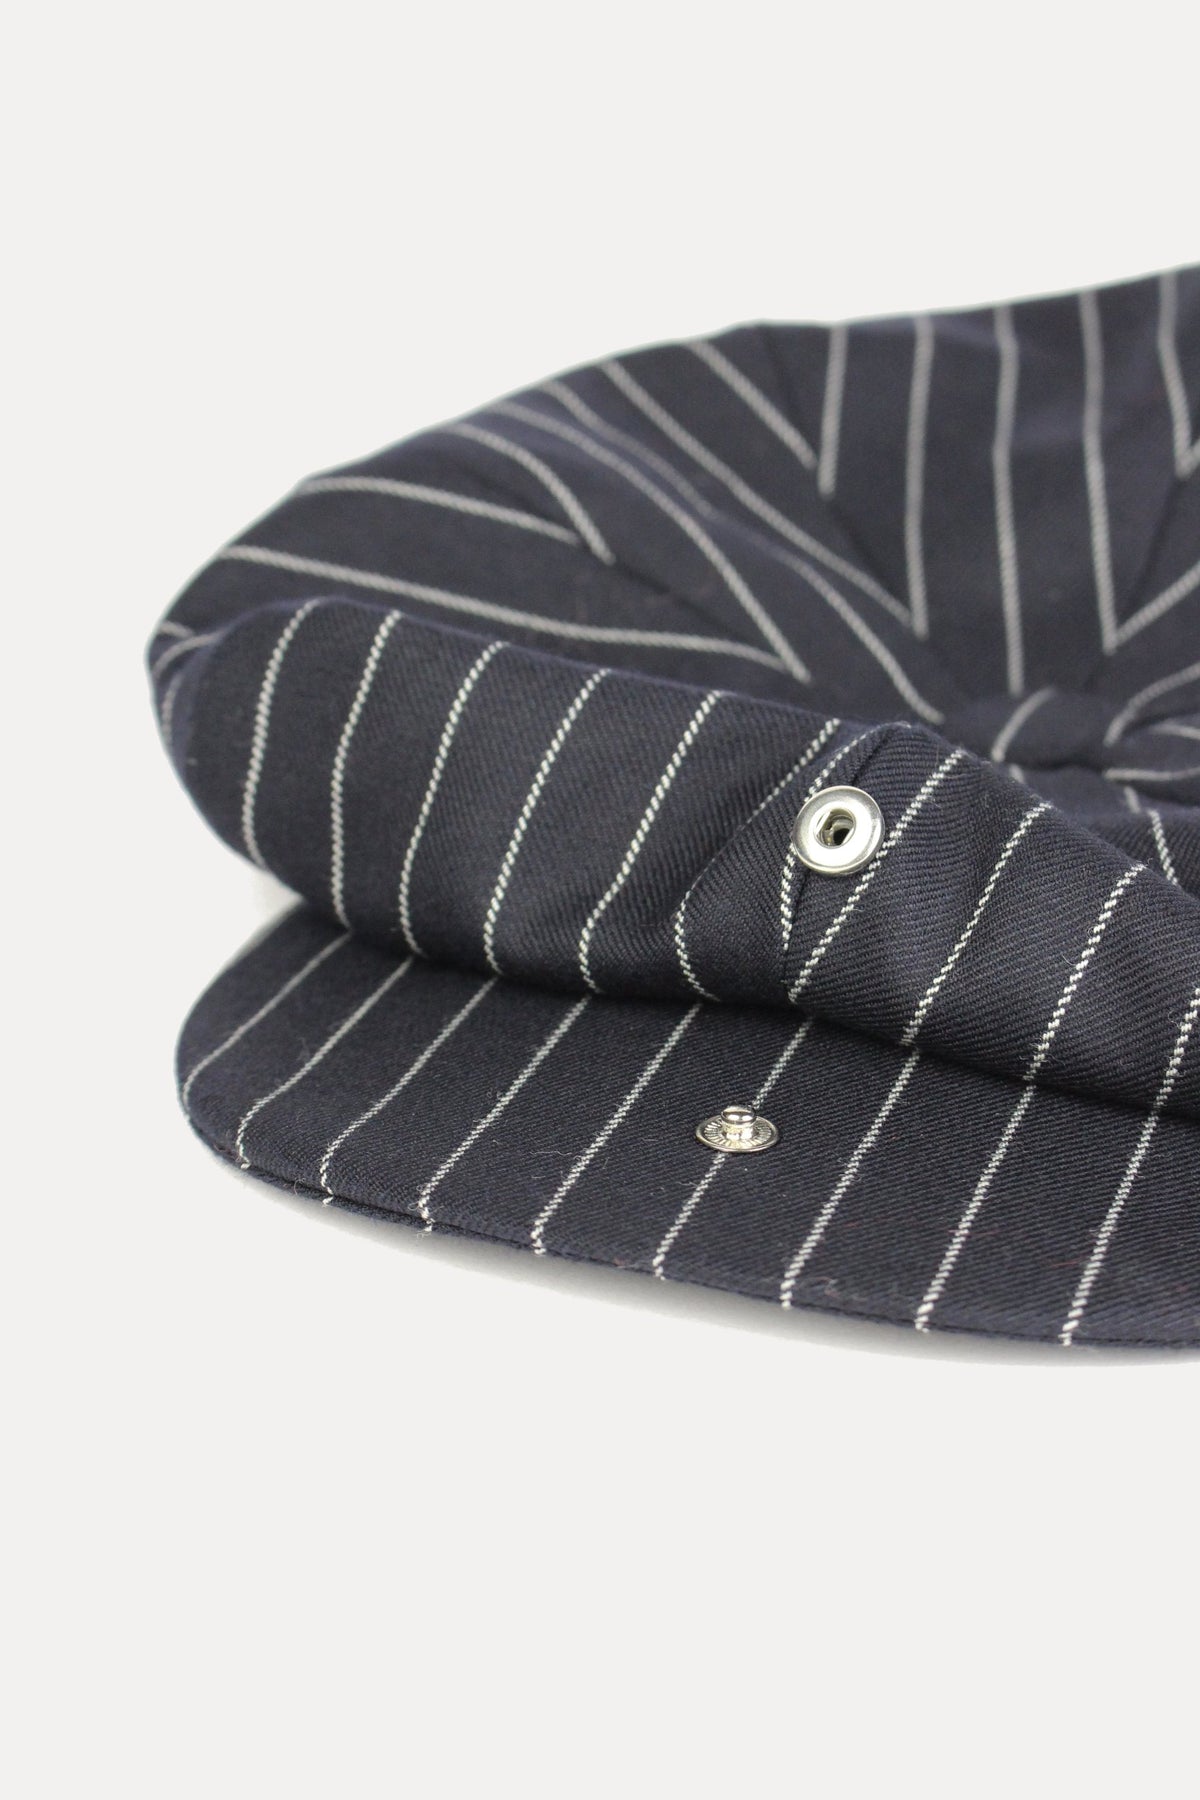 CLYDE - NAVY ROPE STRIPE-hats-A Child Of The Jago